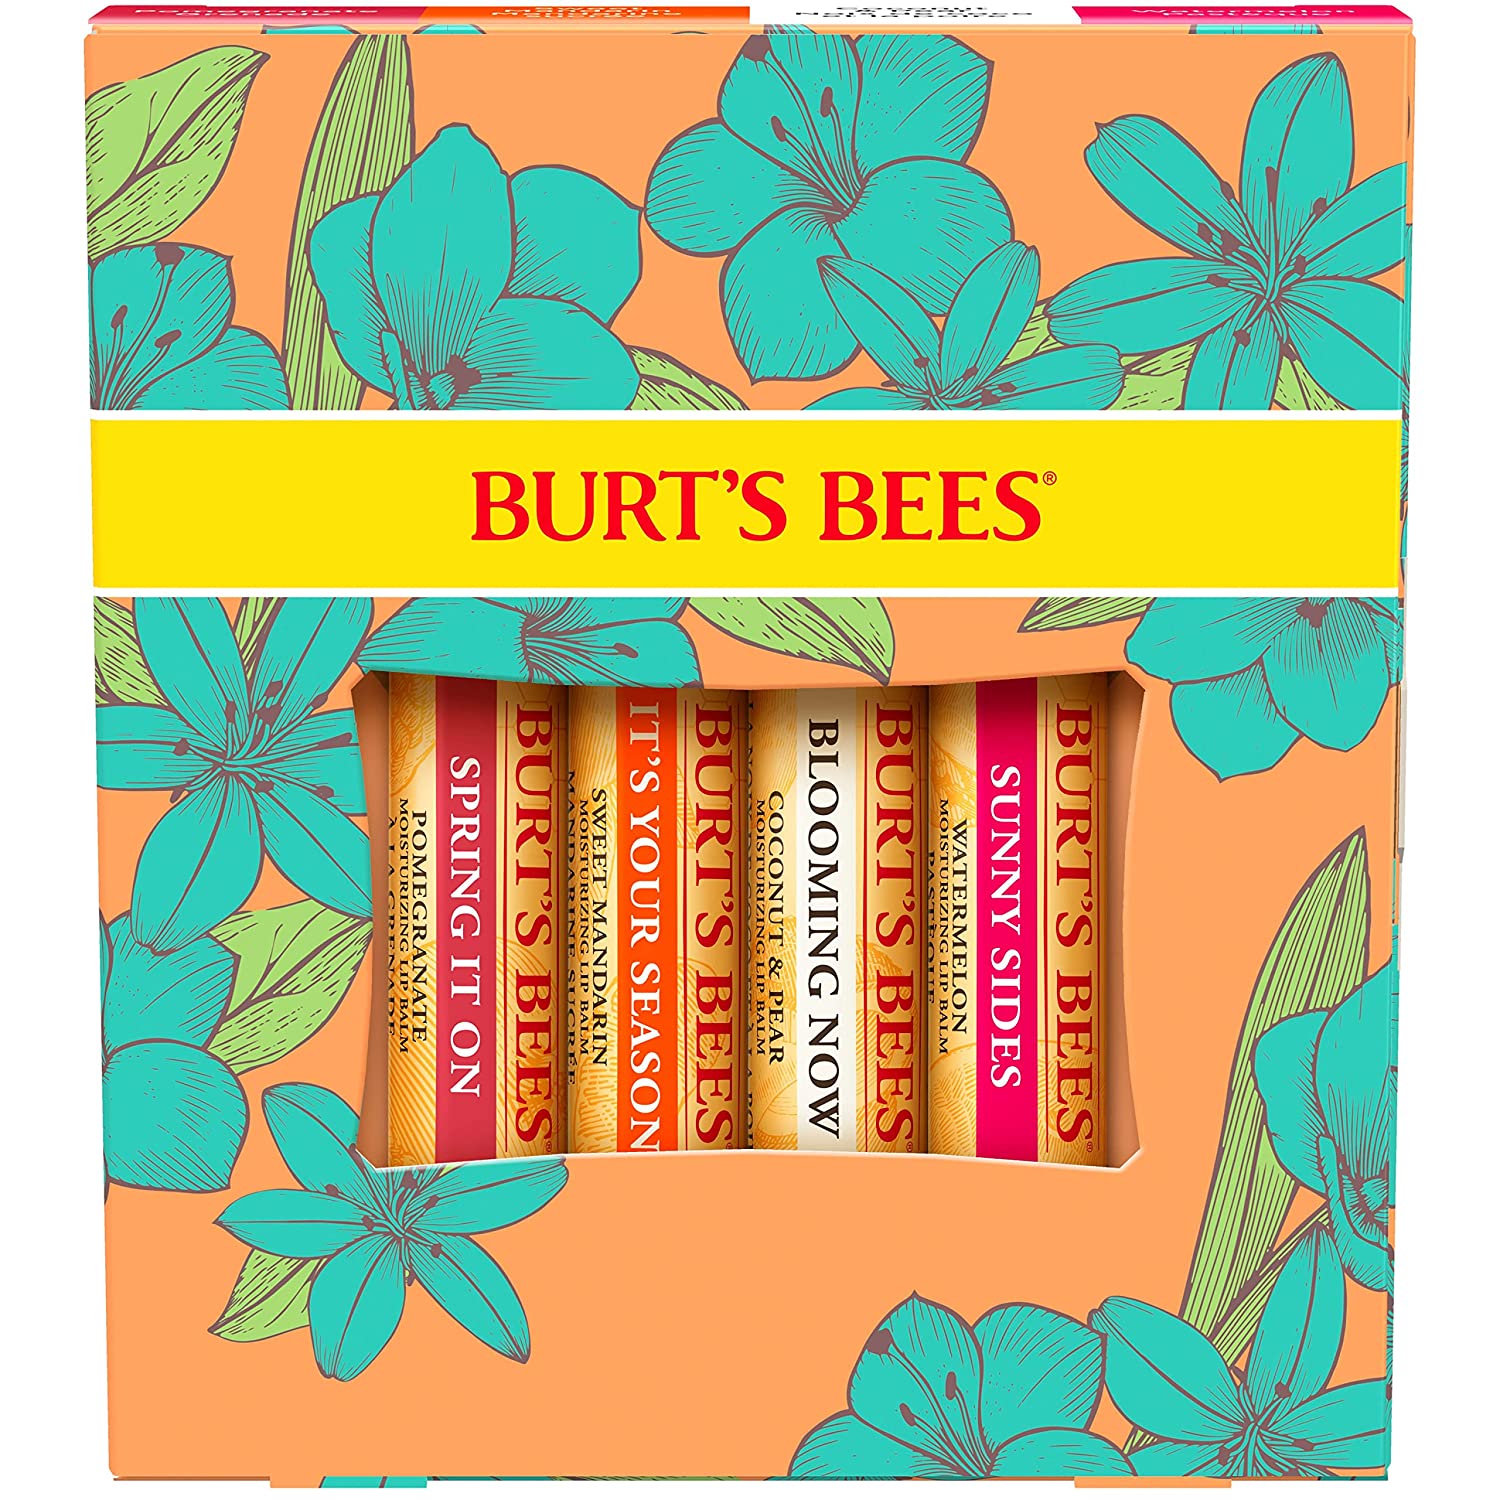 Burt \ 's Bees lip Balm Easter basket Stuffers, Nourishing Lip Care Gifts for All -Day Hydation, Just Picked Set - Pomegranate, Watermelon, Sweet Mandarin & Coconut and Pear, Pack of 4 (Packaging May Vary)